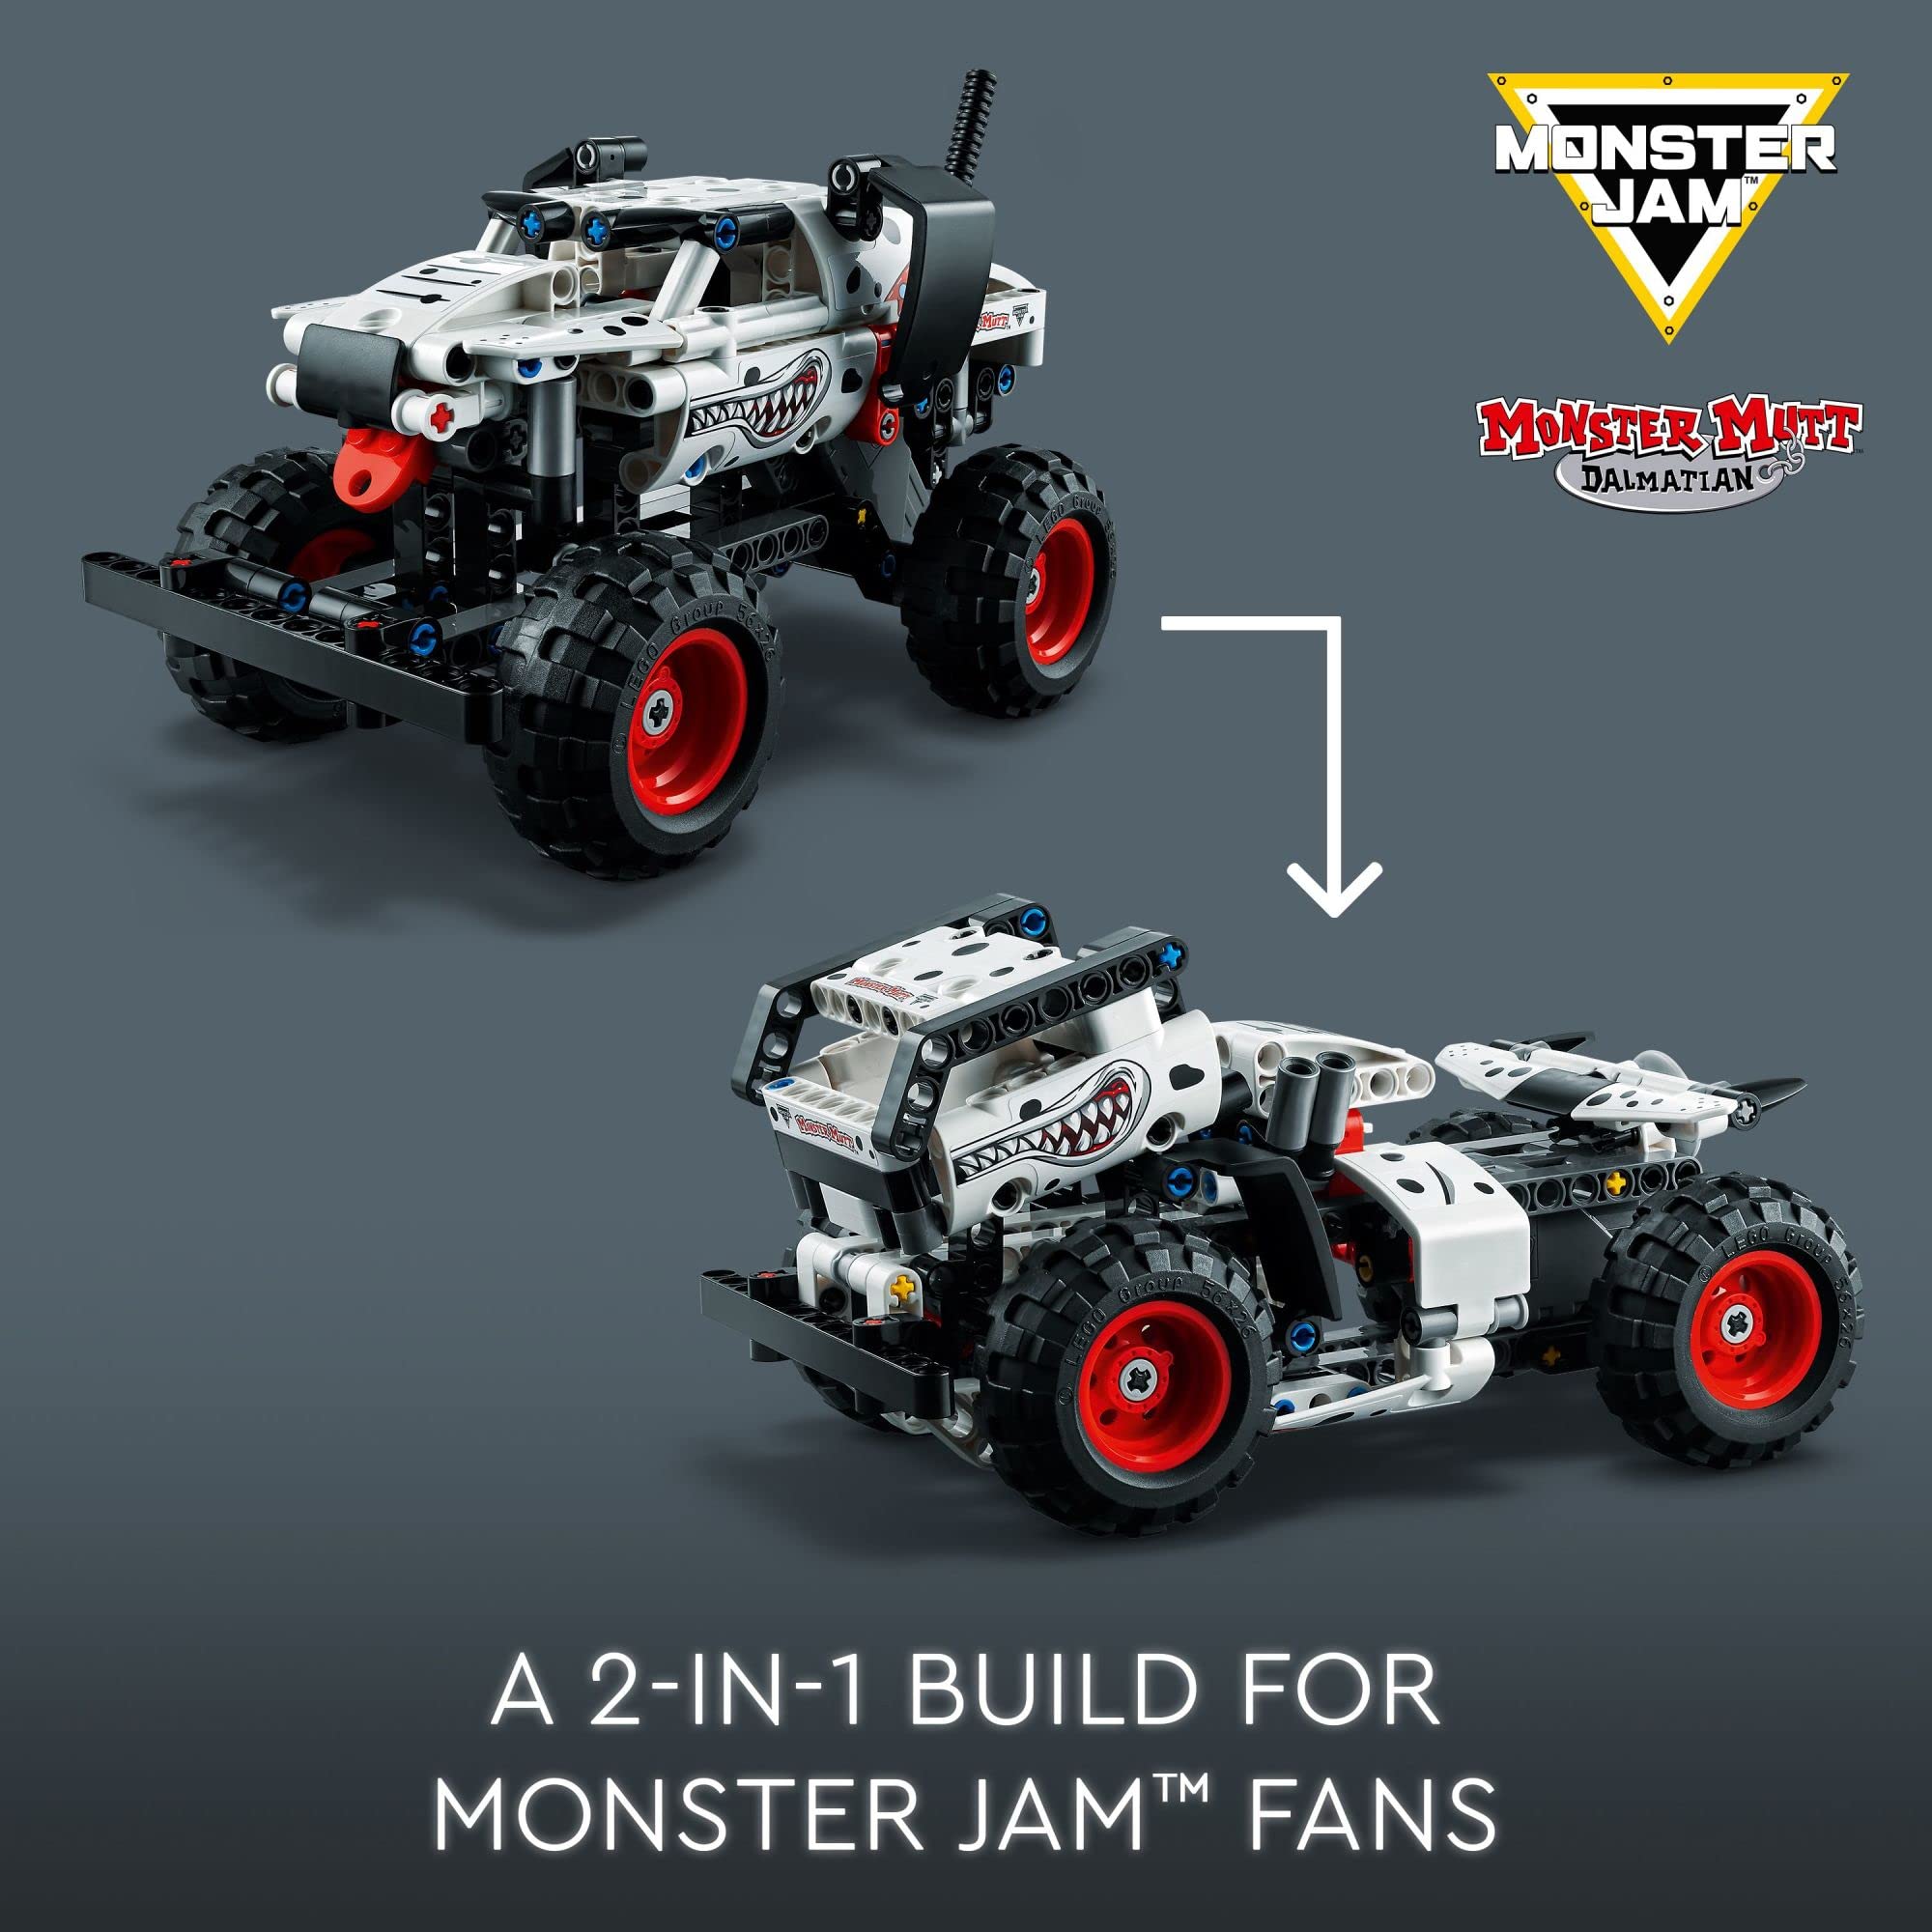 LEGO Technic Monster Jam Monster Mutt Dalmatian 42150, Truck Toy for Kids, Boys and Girls Ages 7 Plus, 2in1 Pull Back Racing Toys, Birthday Gift Idea, Summer DIY Building Toy Ideas for Outdoor Play